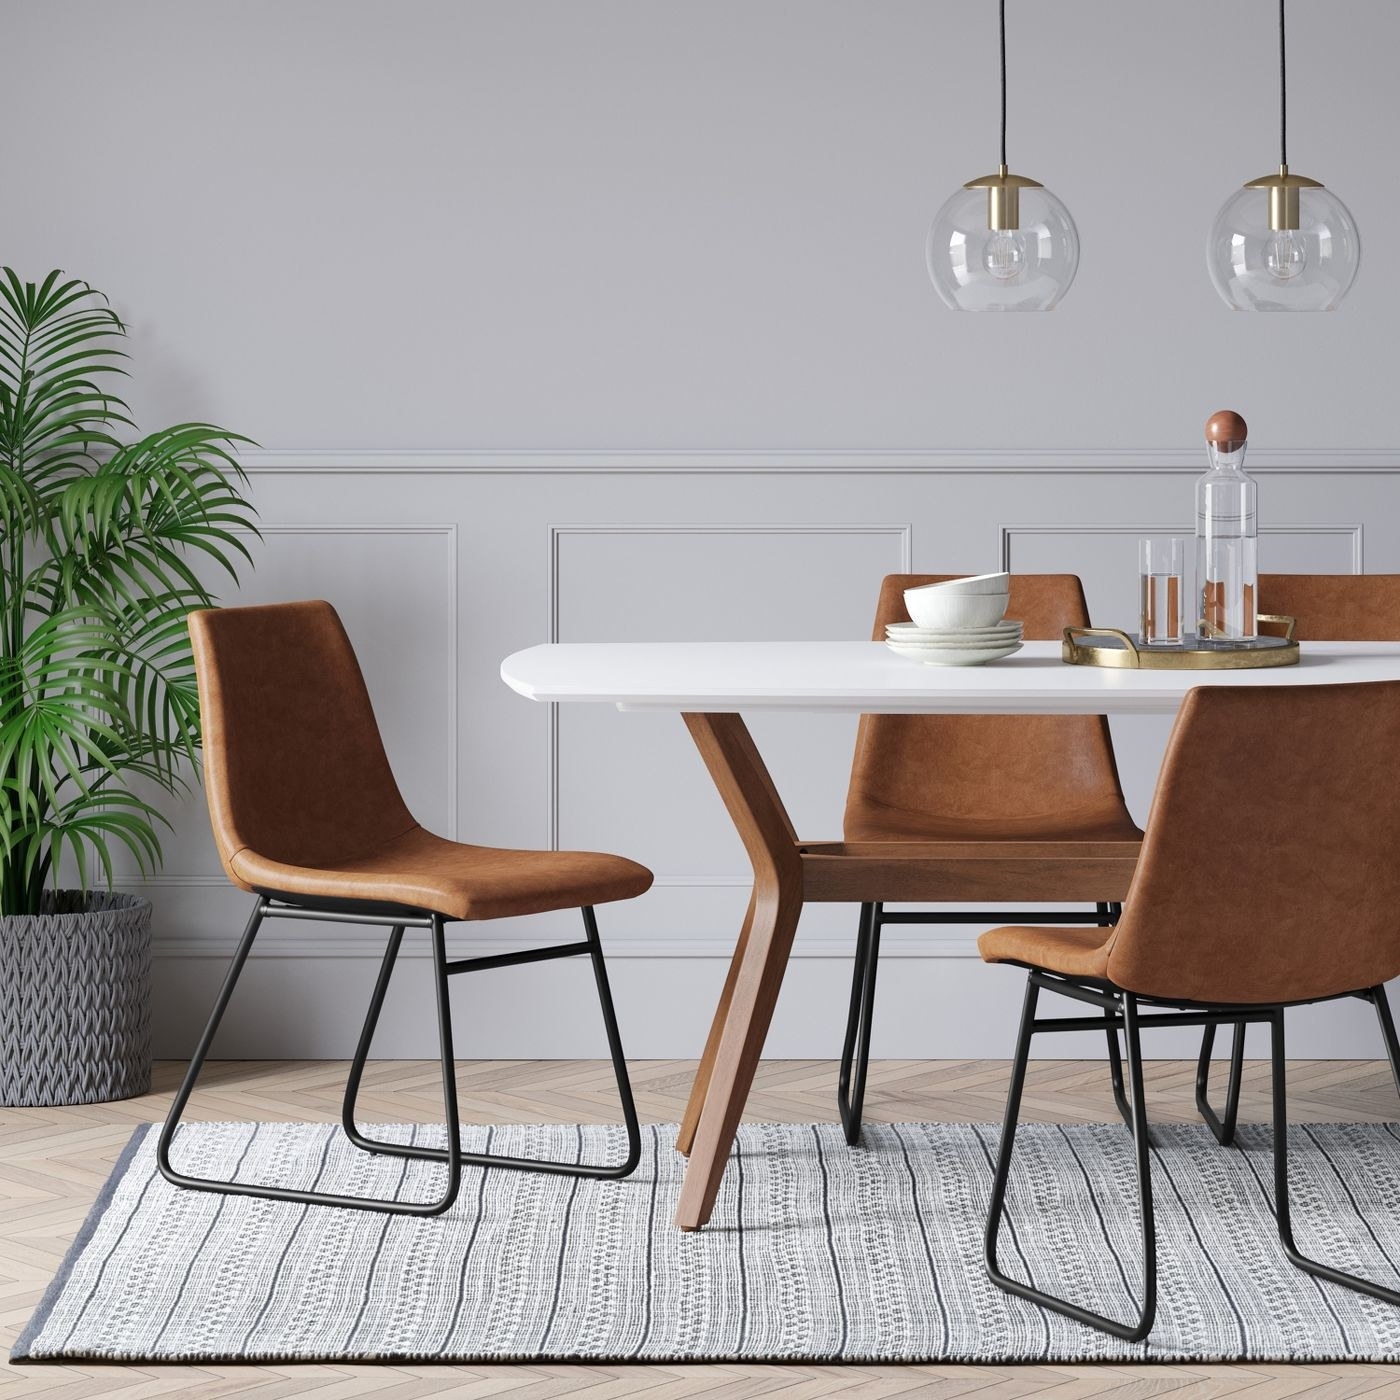 A set of faux leather and metal dining chairs around a table